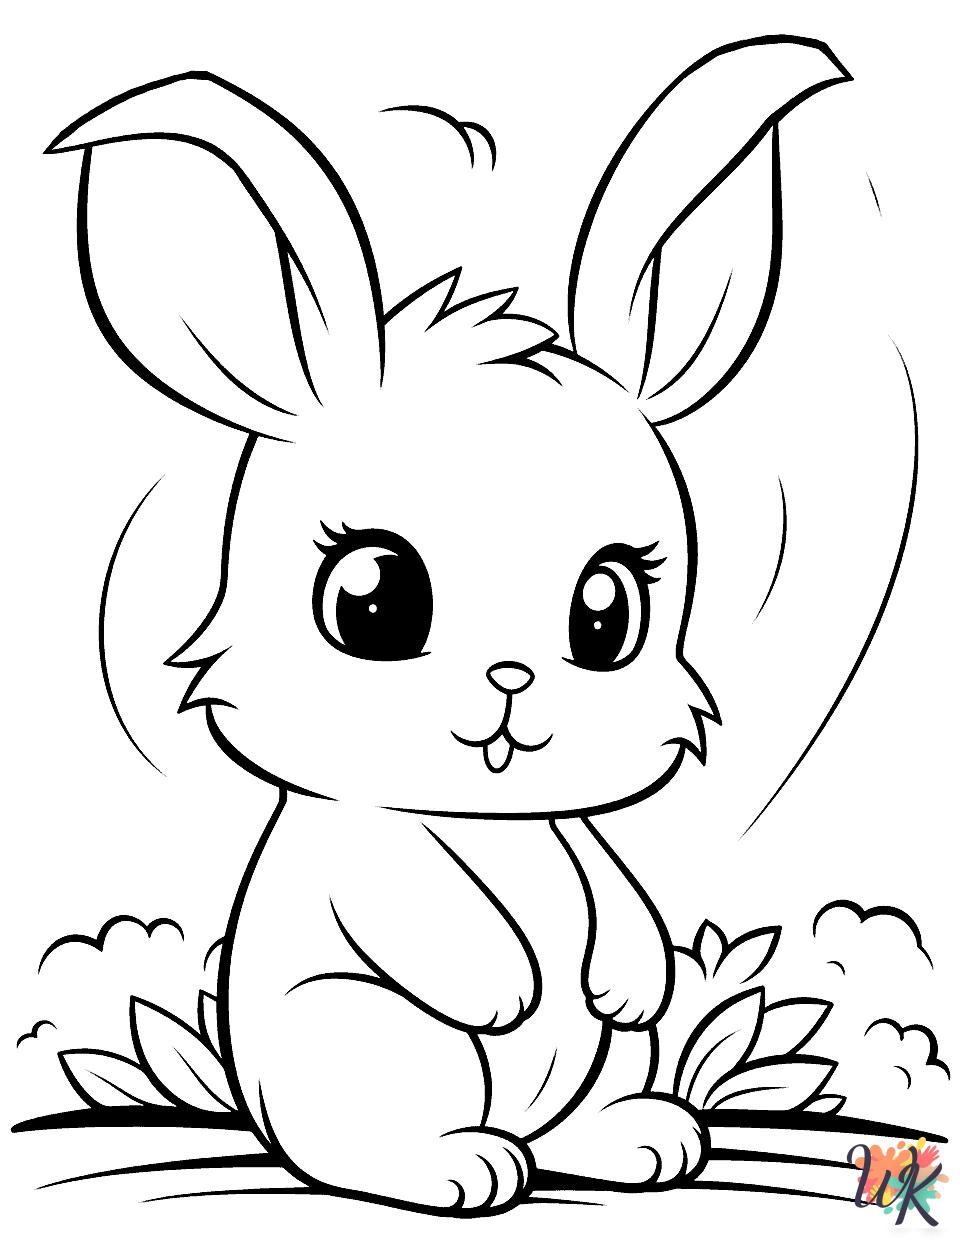 Rabbits decorations coloring pages